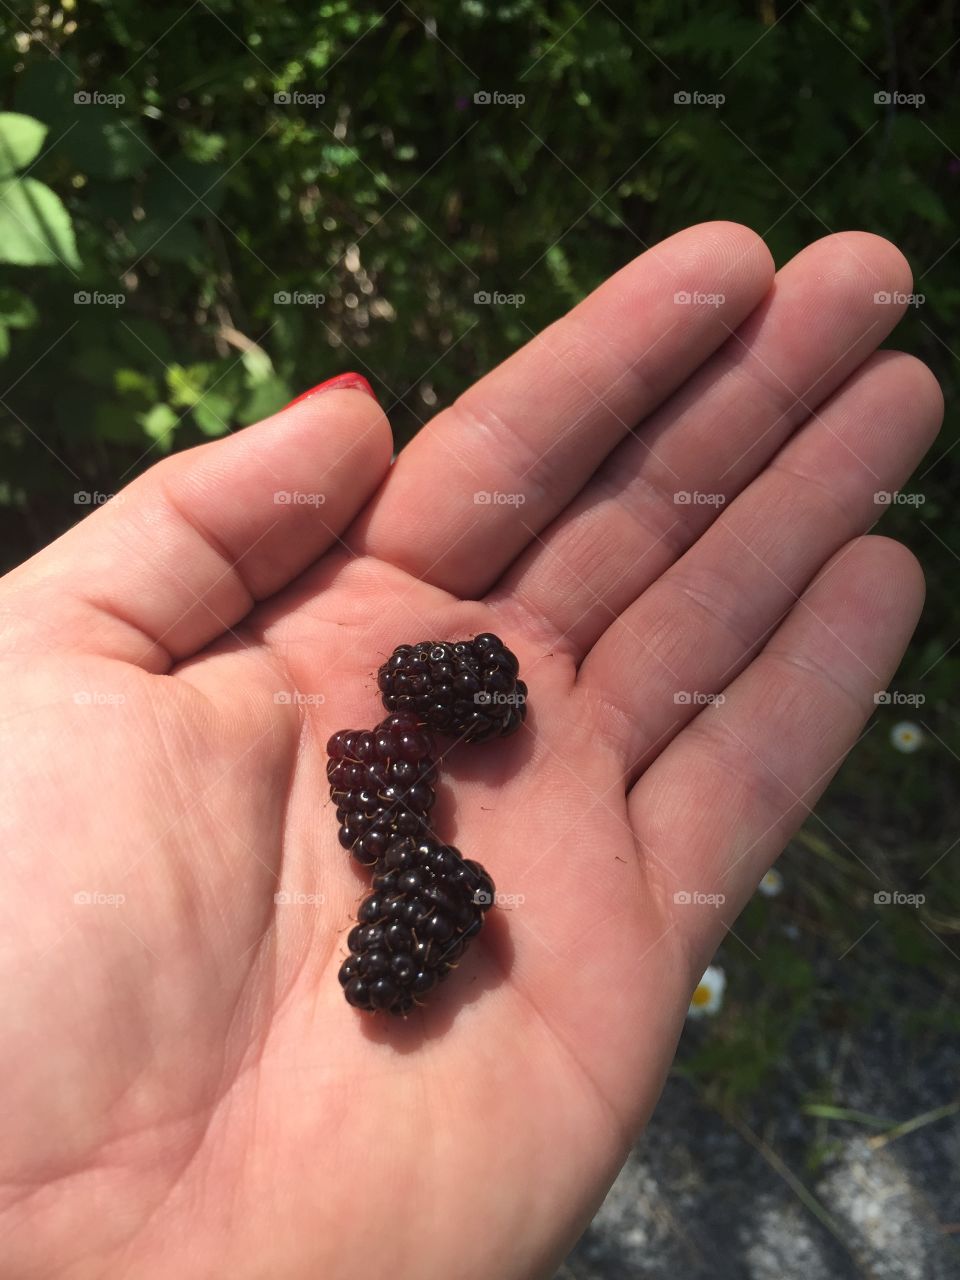 |July 2018| Trailing blackberries at Nisqually-Mashel State Park. 